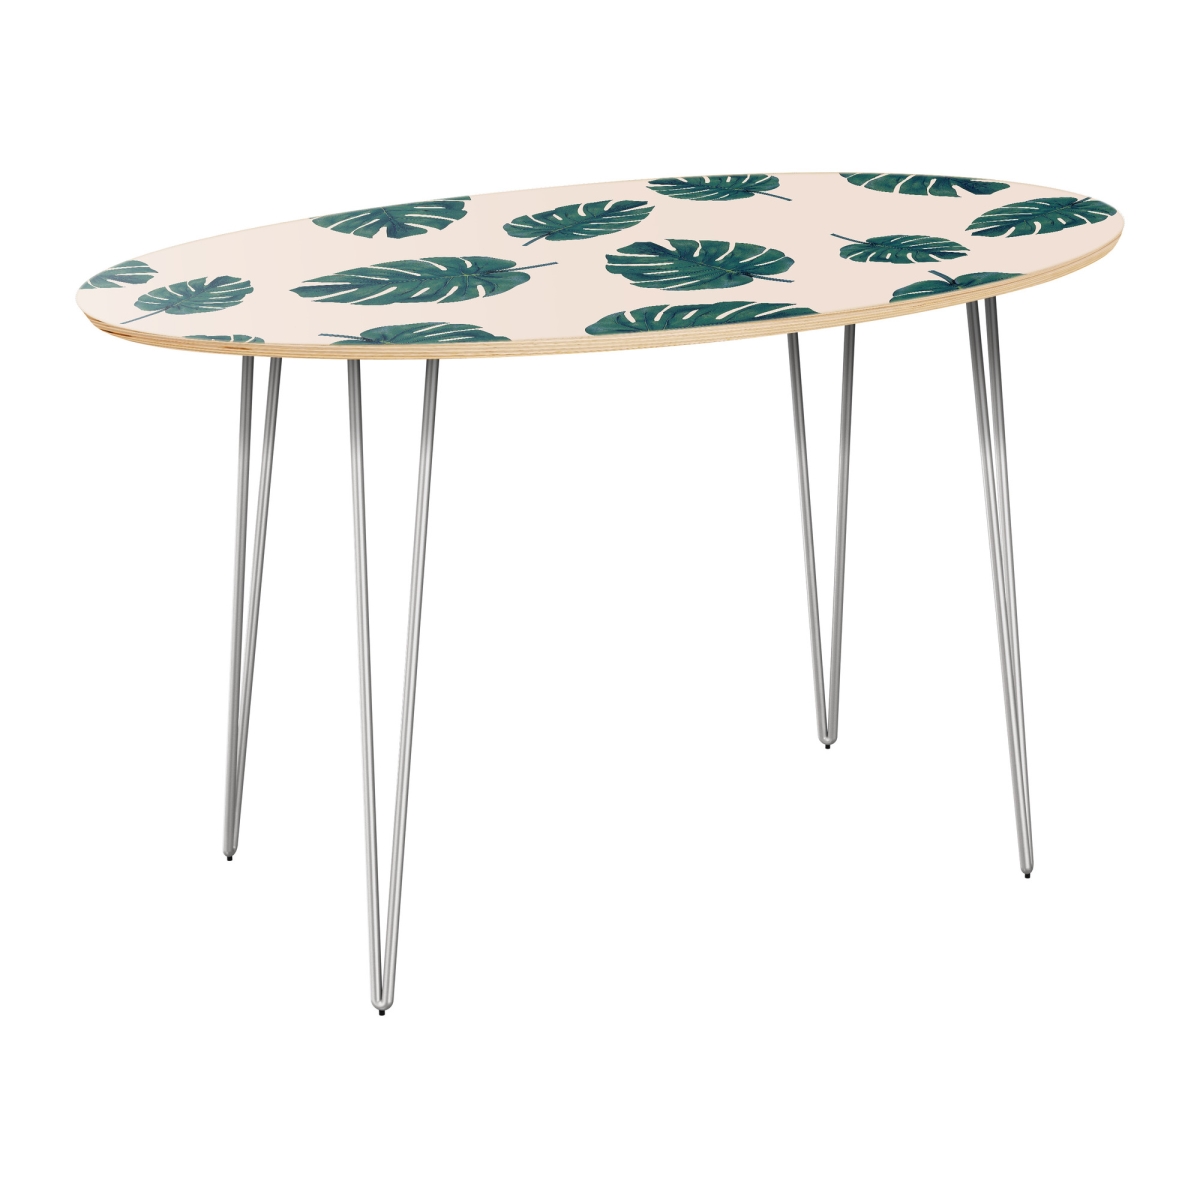 NyeKoncept 12018636 Ondine Hairpin Dining Table -